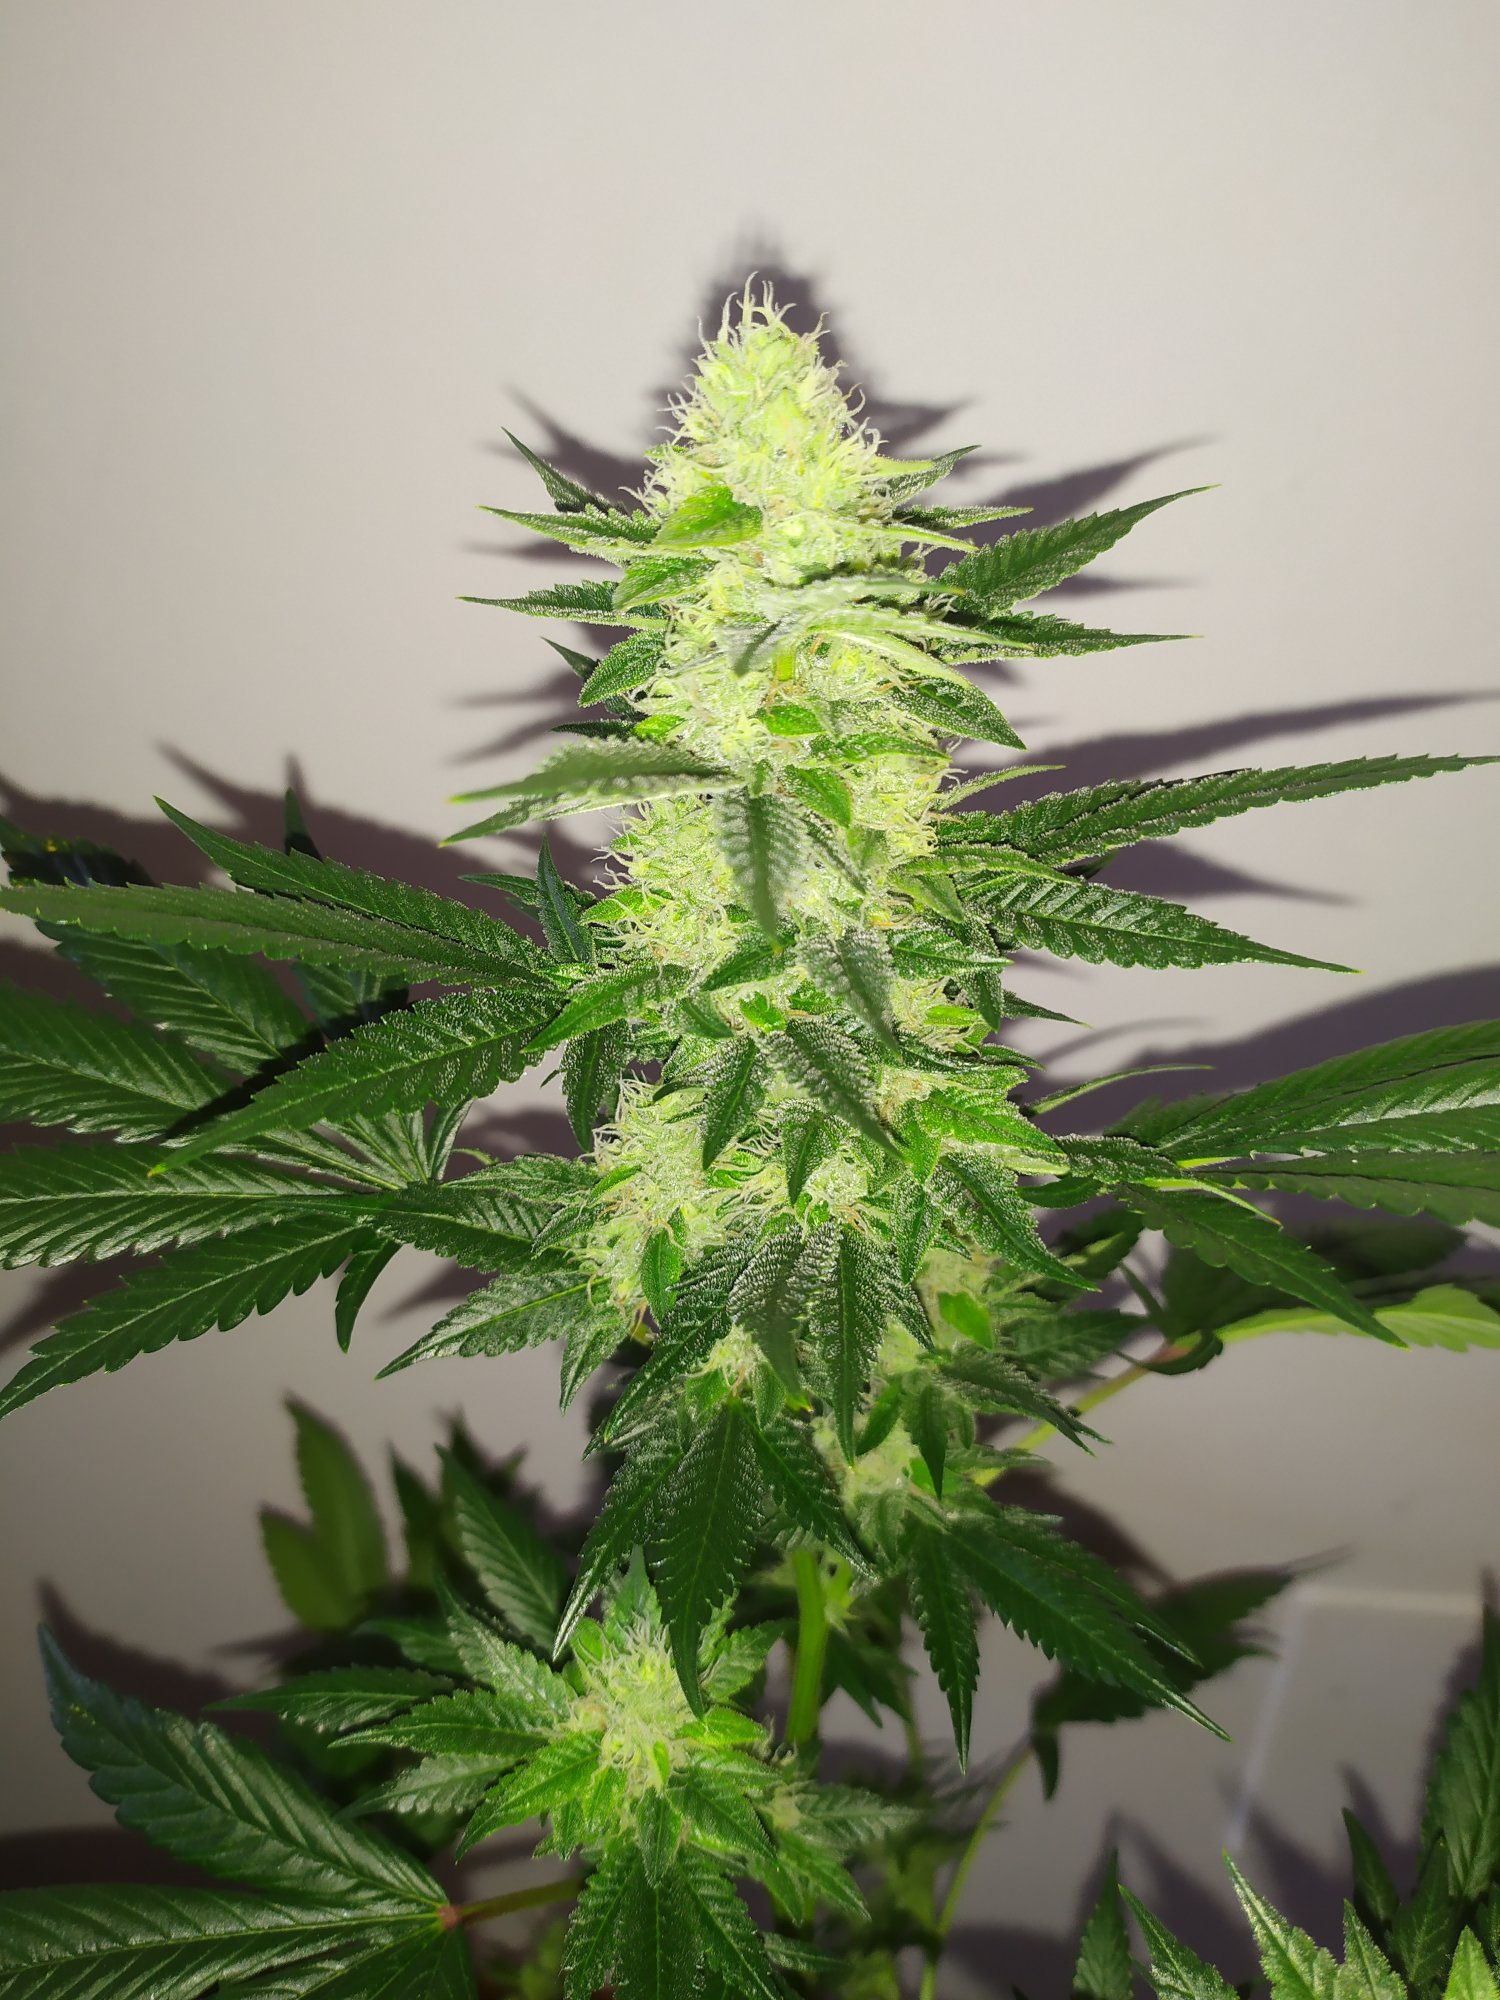 Tips for growing the original gg4 cut 6